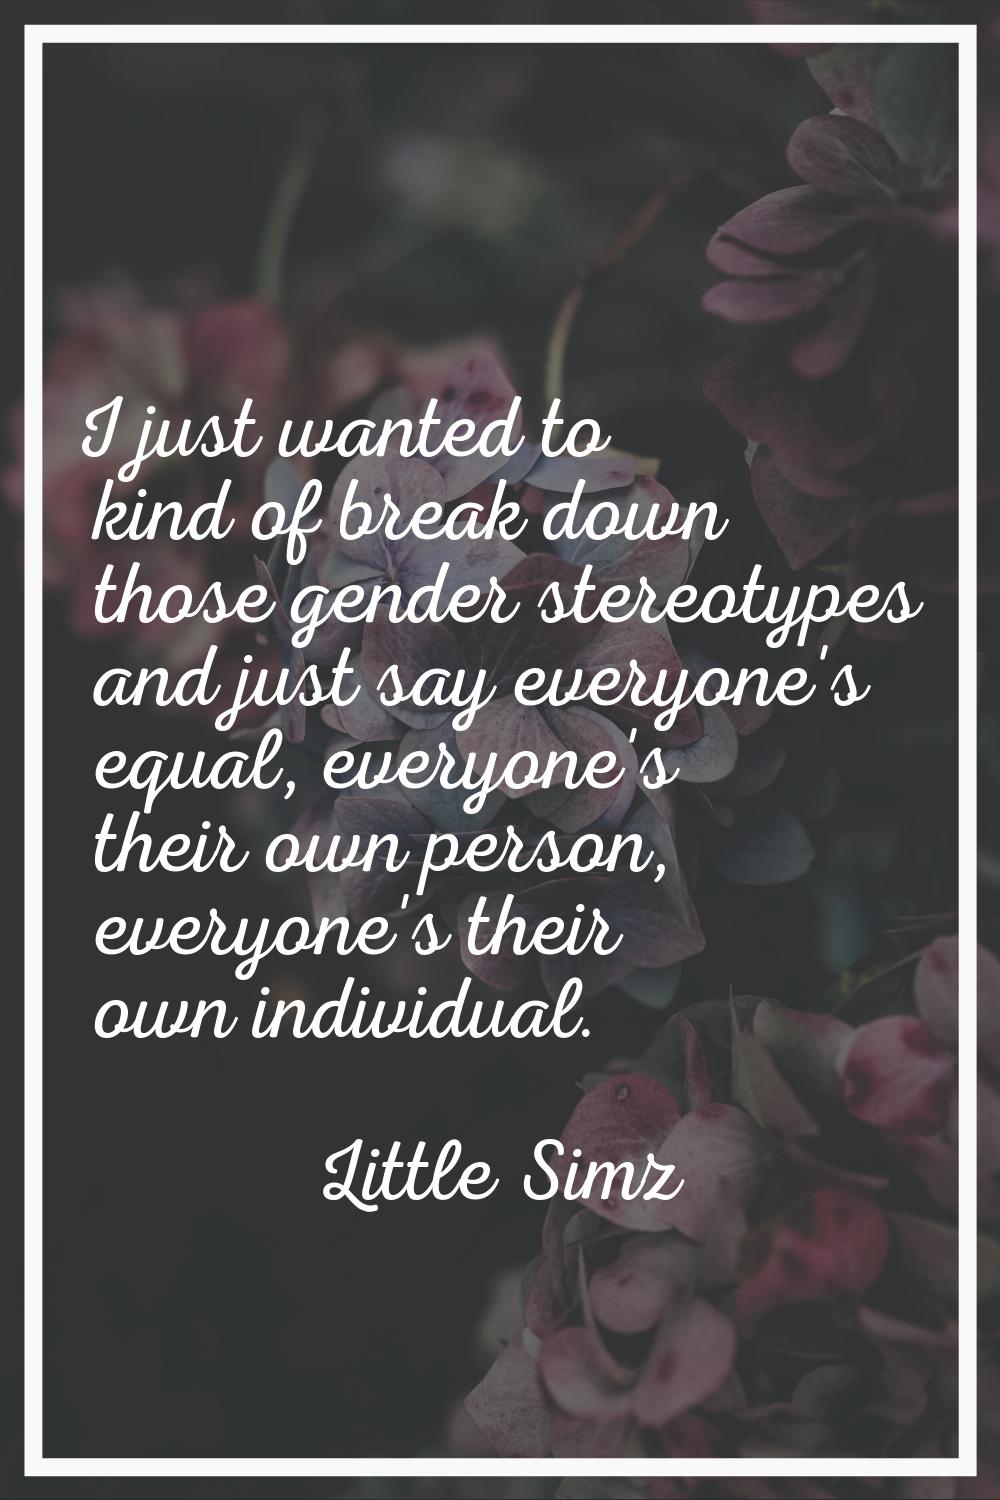 I just wanted to kind of break down those gender stereotypes and just say everyone's equal, everyon